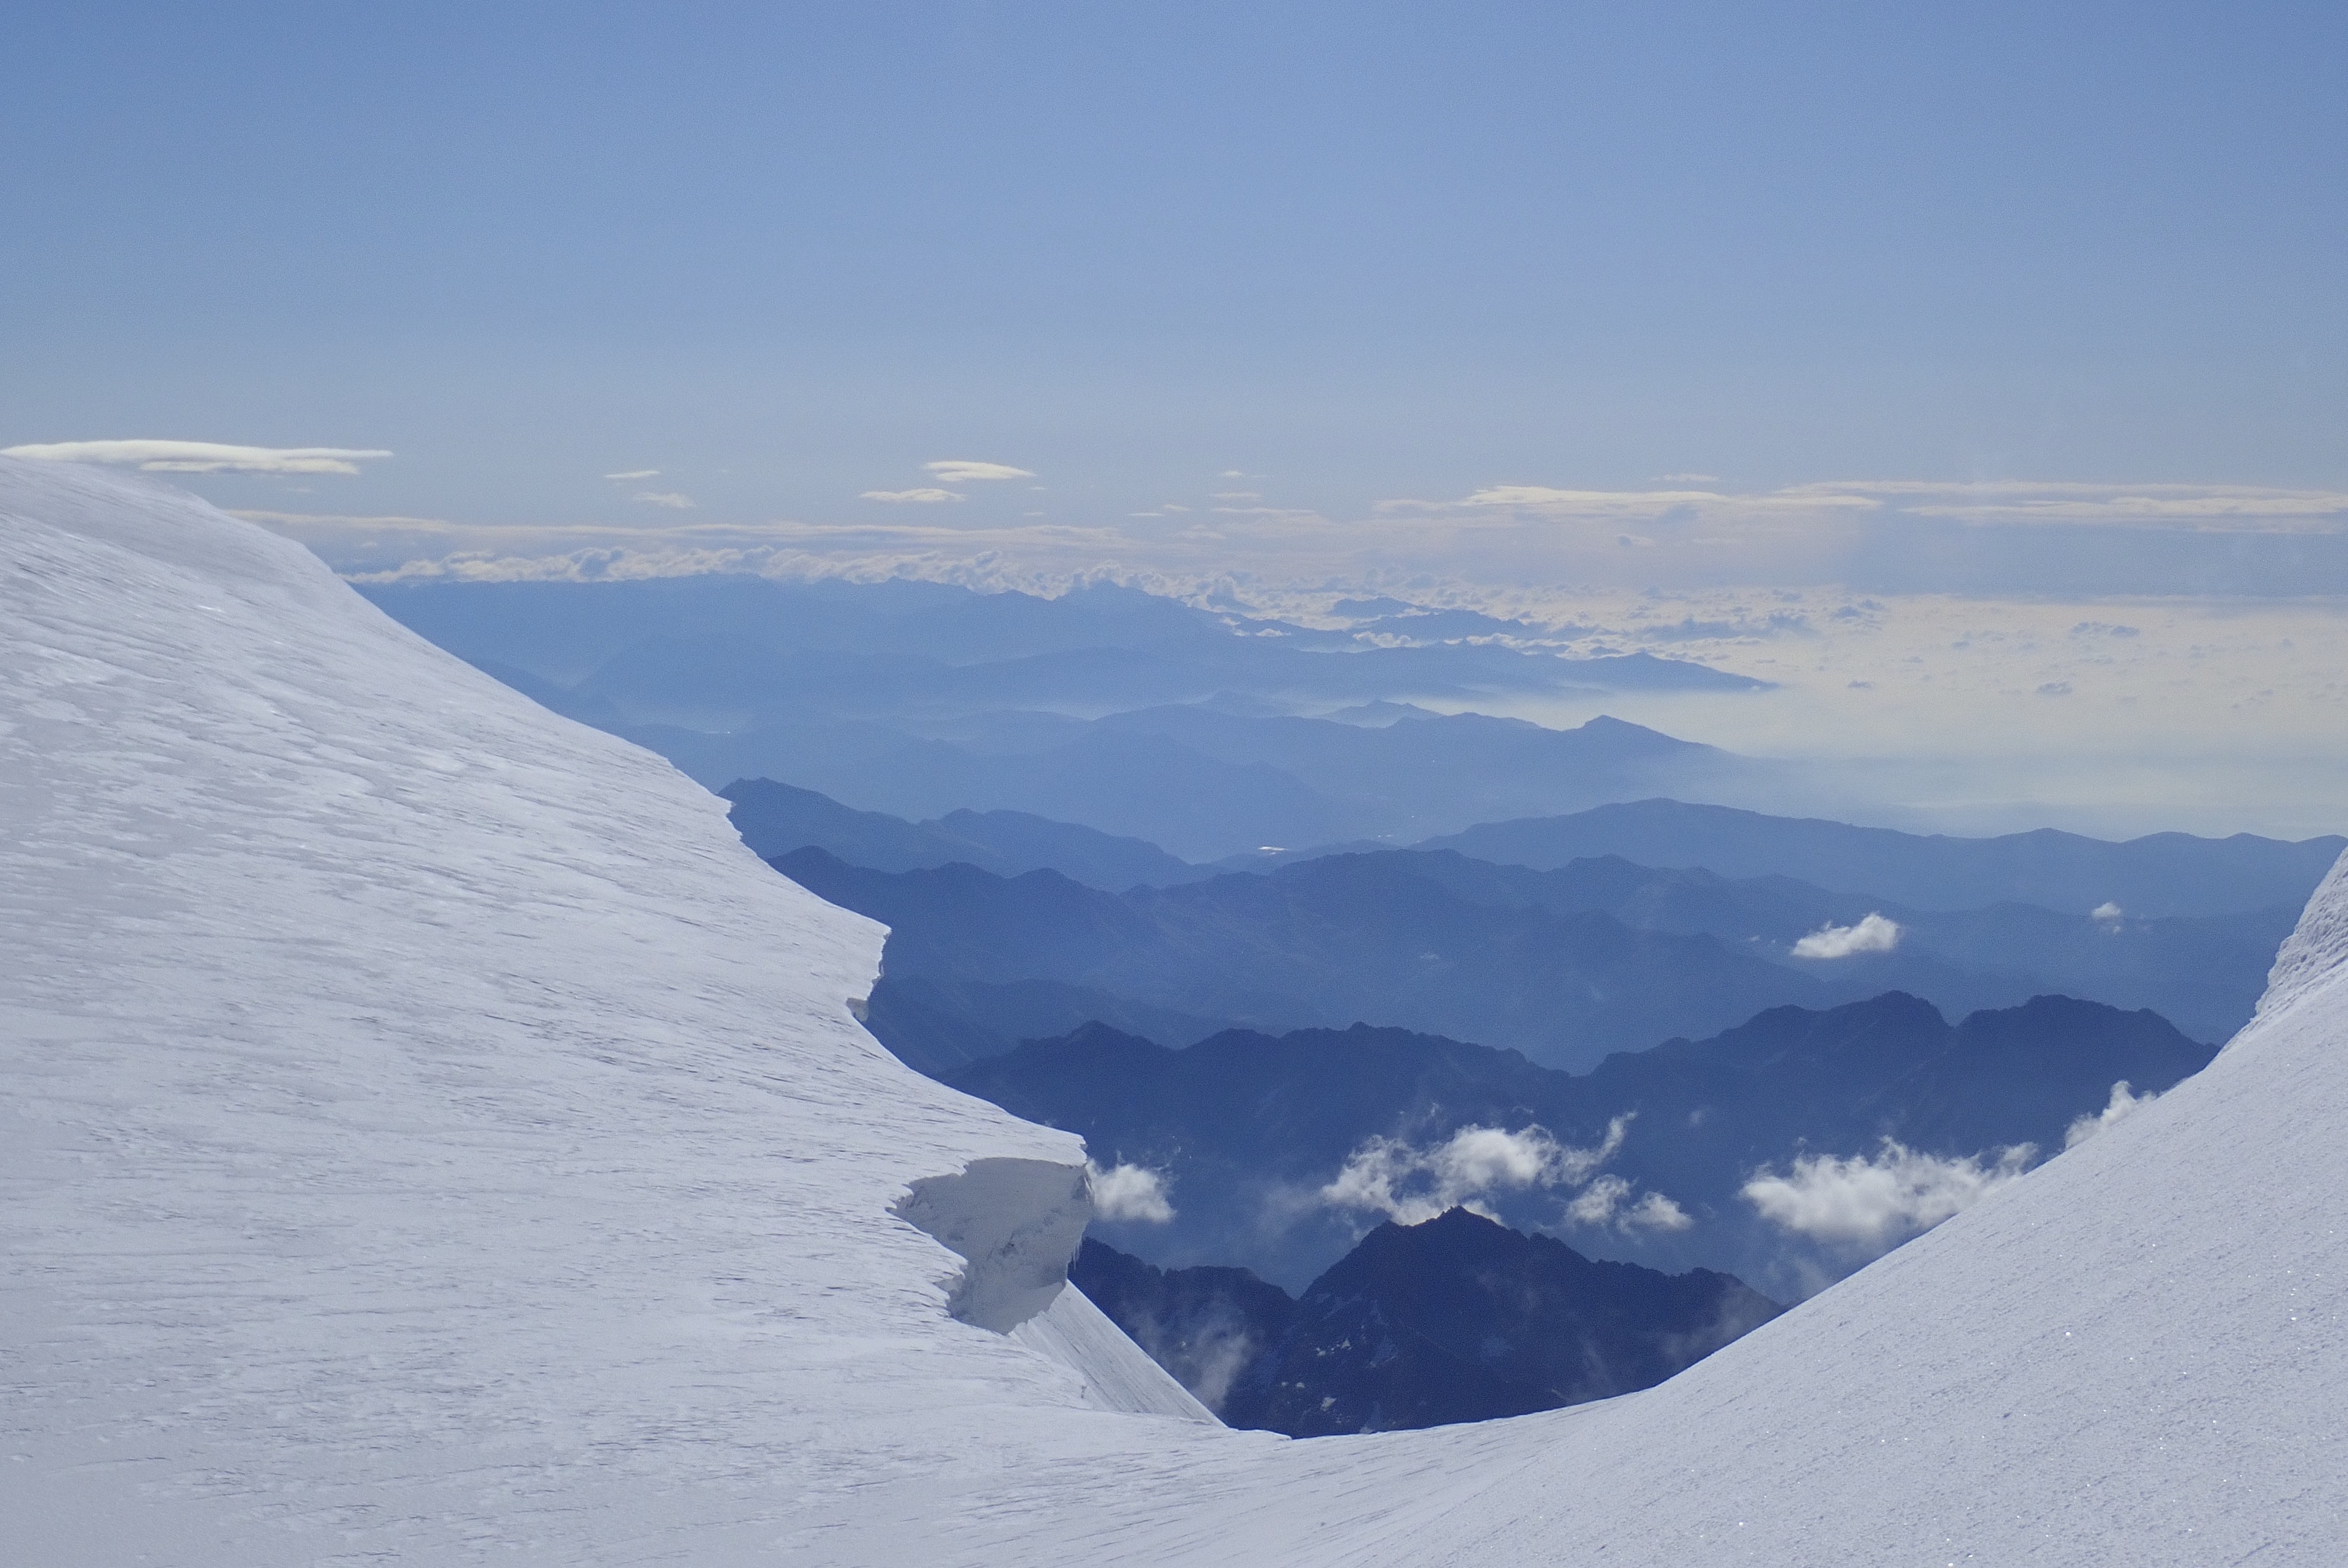 Higher, Whiter (At the top of the Monterosa massif)